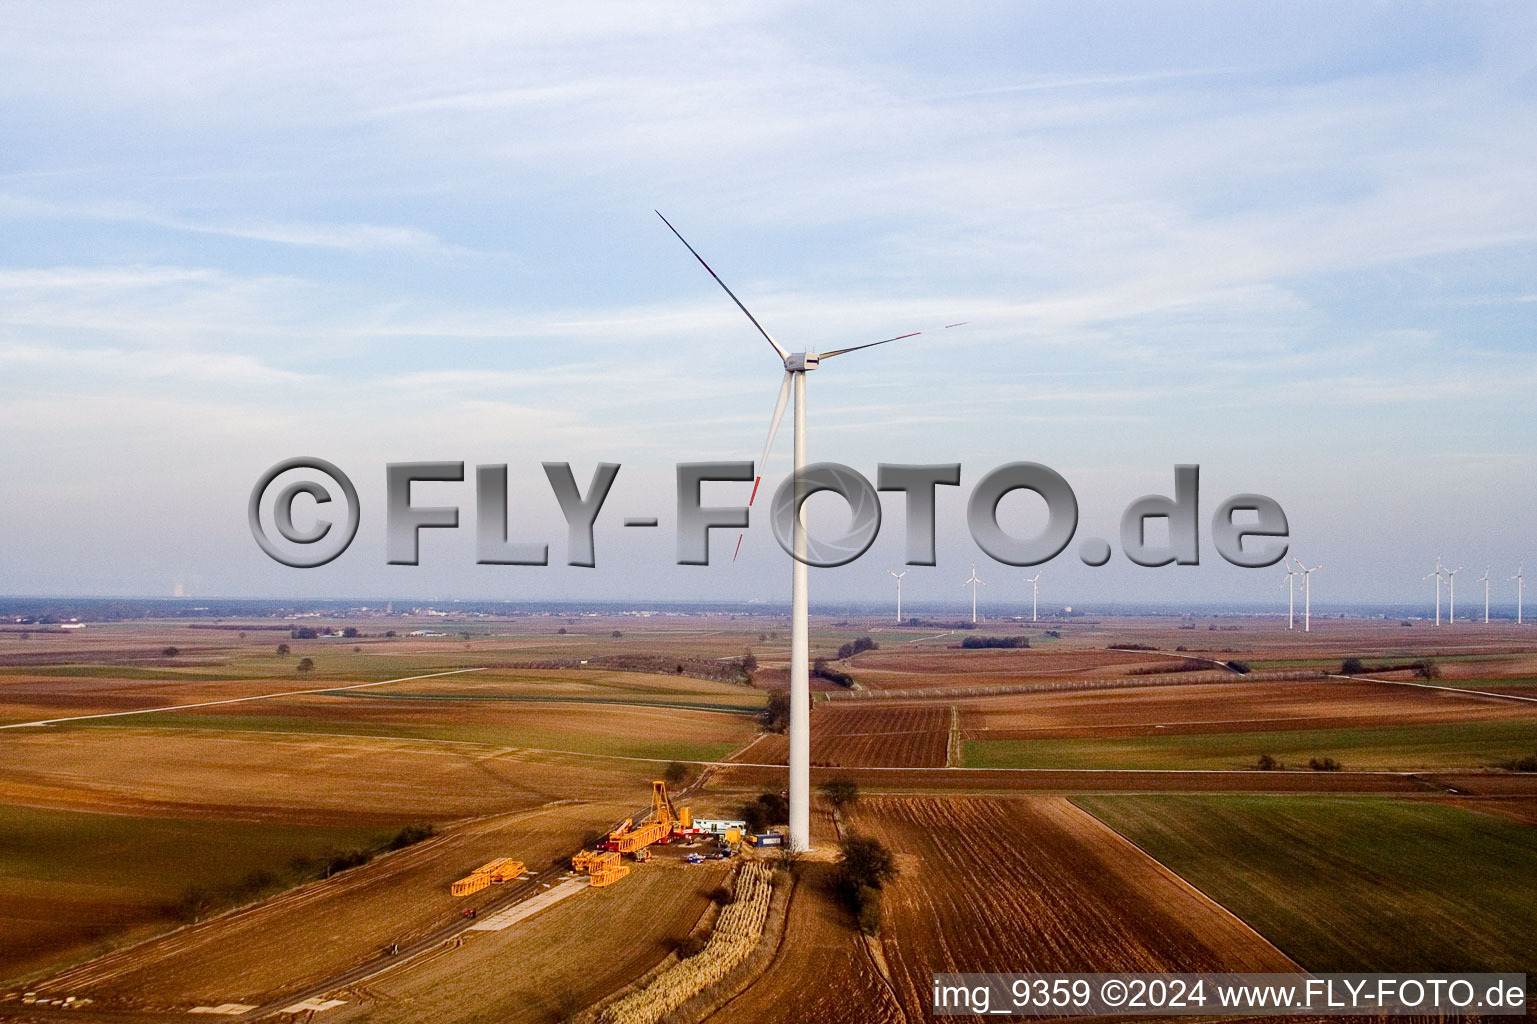 Oblique view of Wind turbines in Offenbach an der Queich in the state Rhineland-Palatinate, Germany